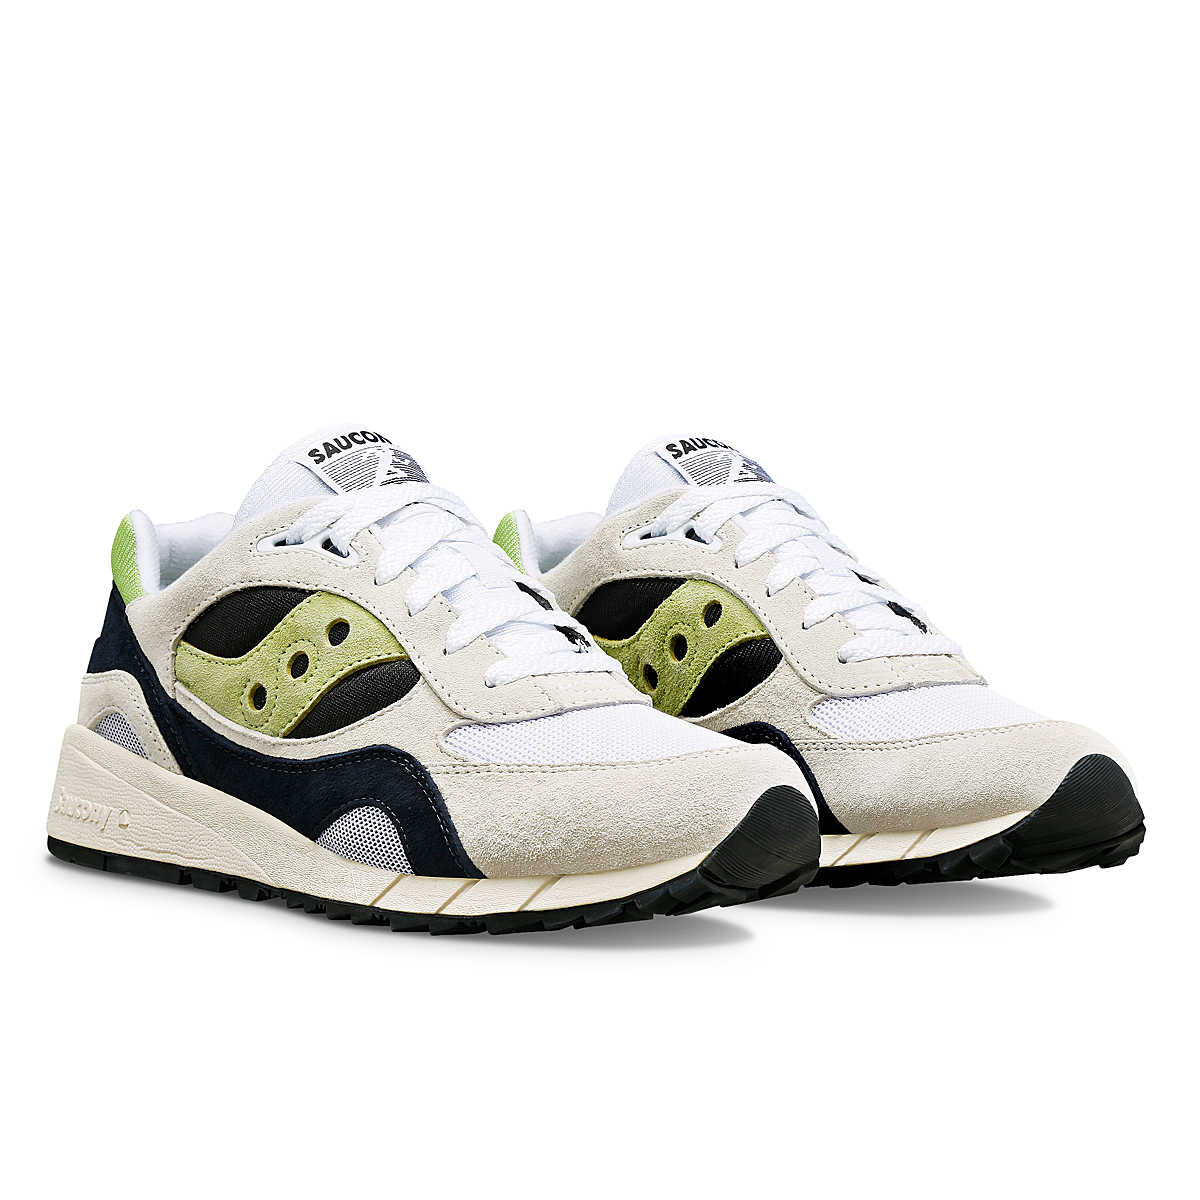 Saucony Mens Shadow 6000 Trainers - White / Green